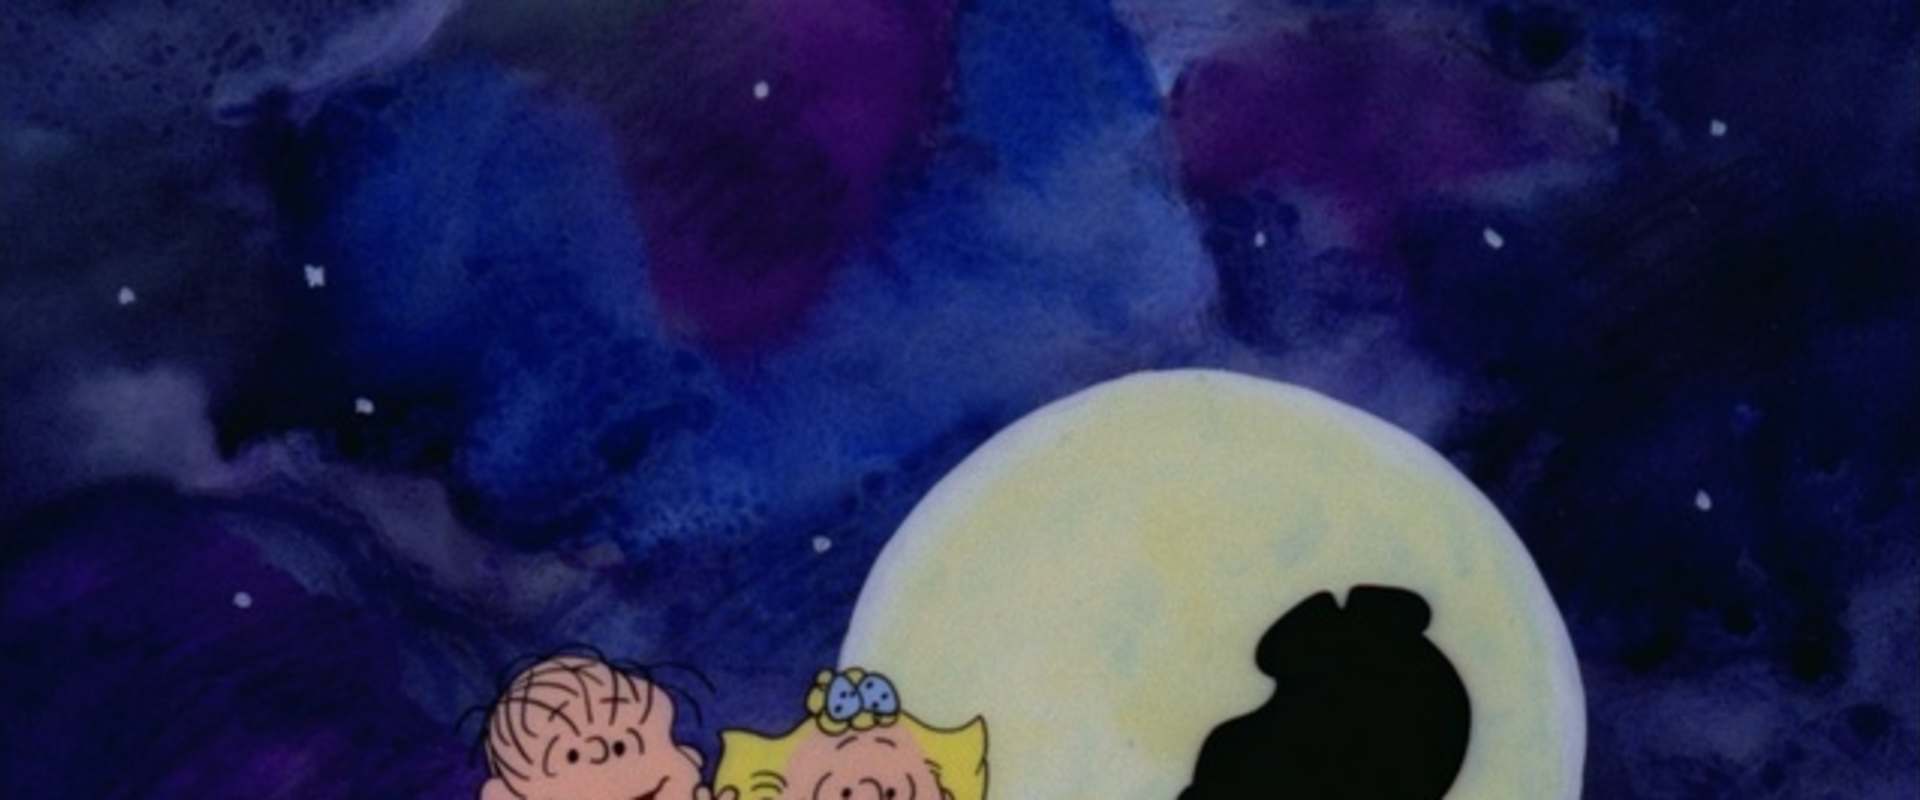 It's the Great Pumpkin, Charlie Brown background 2